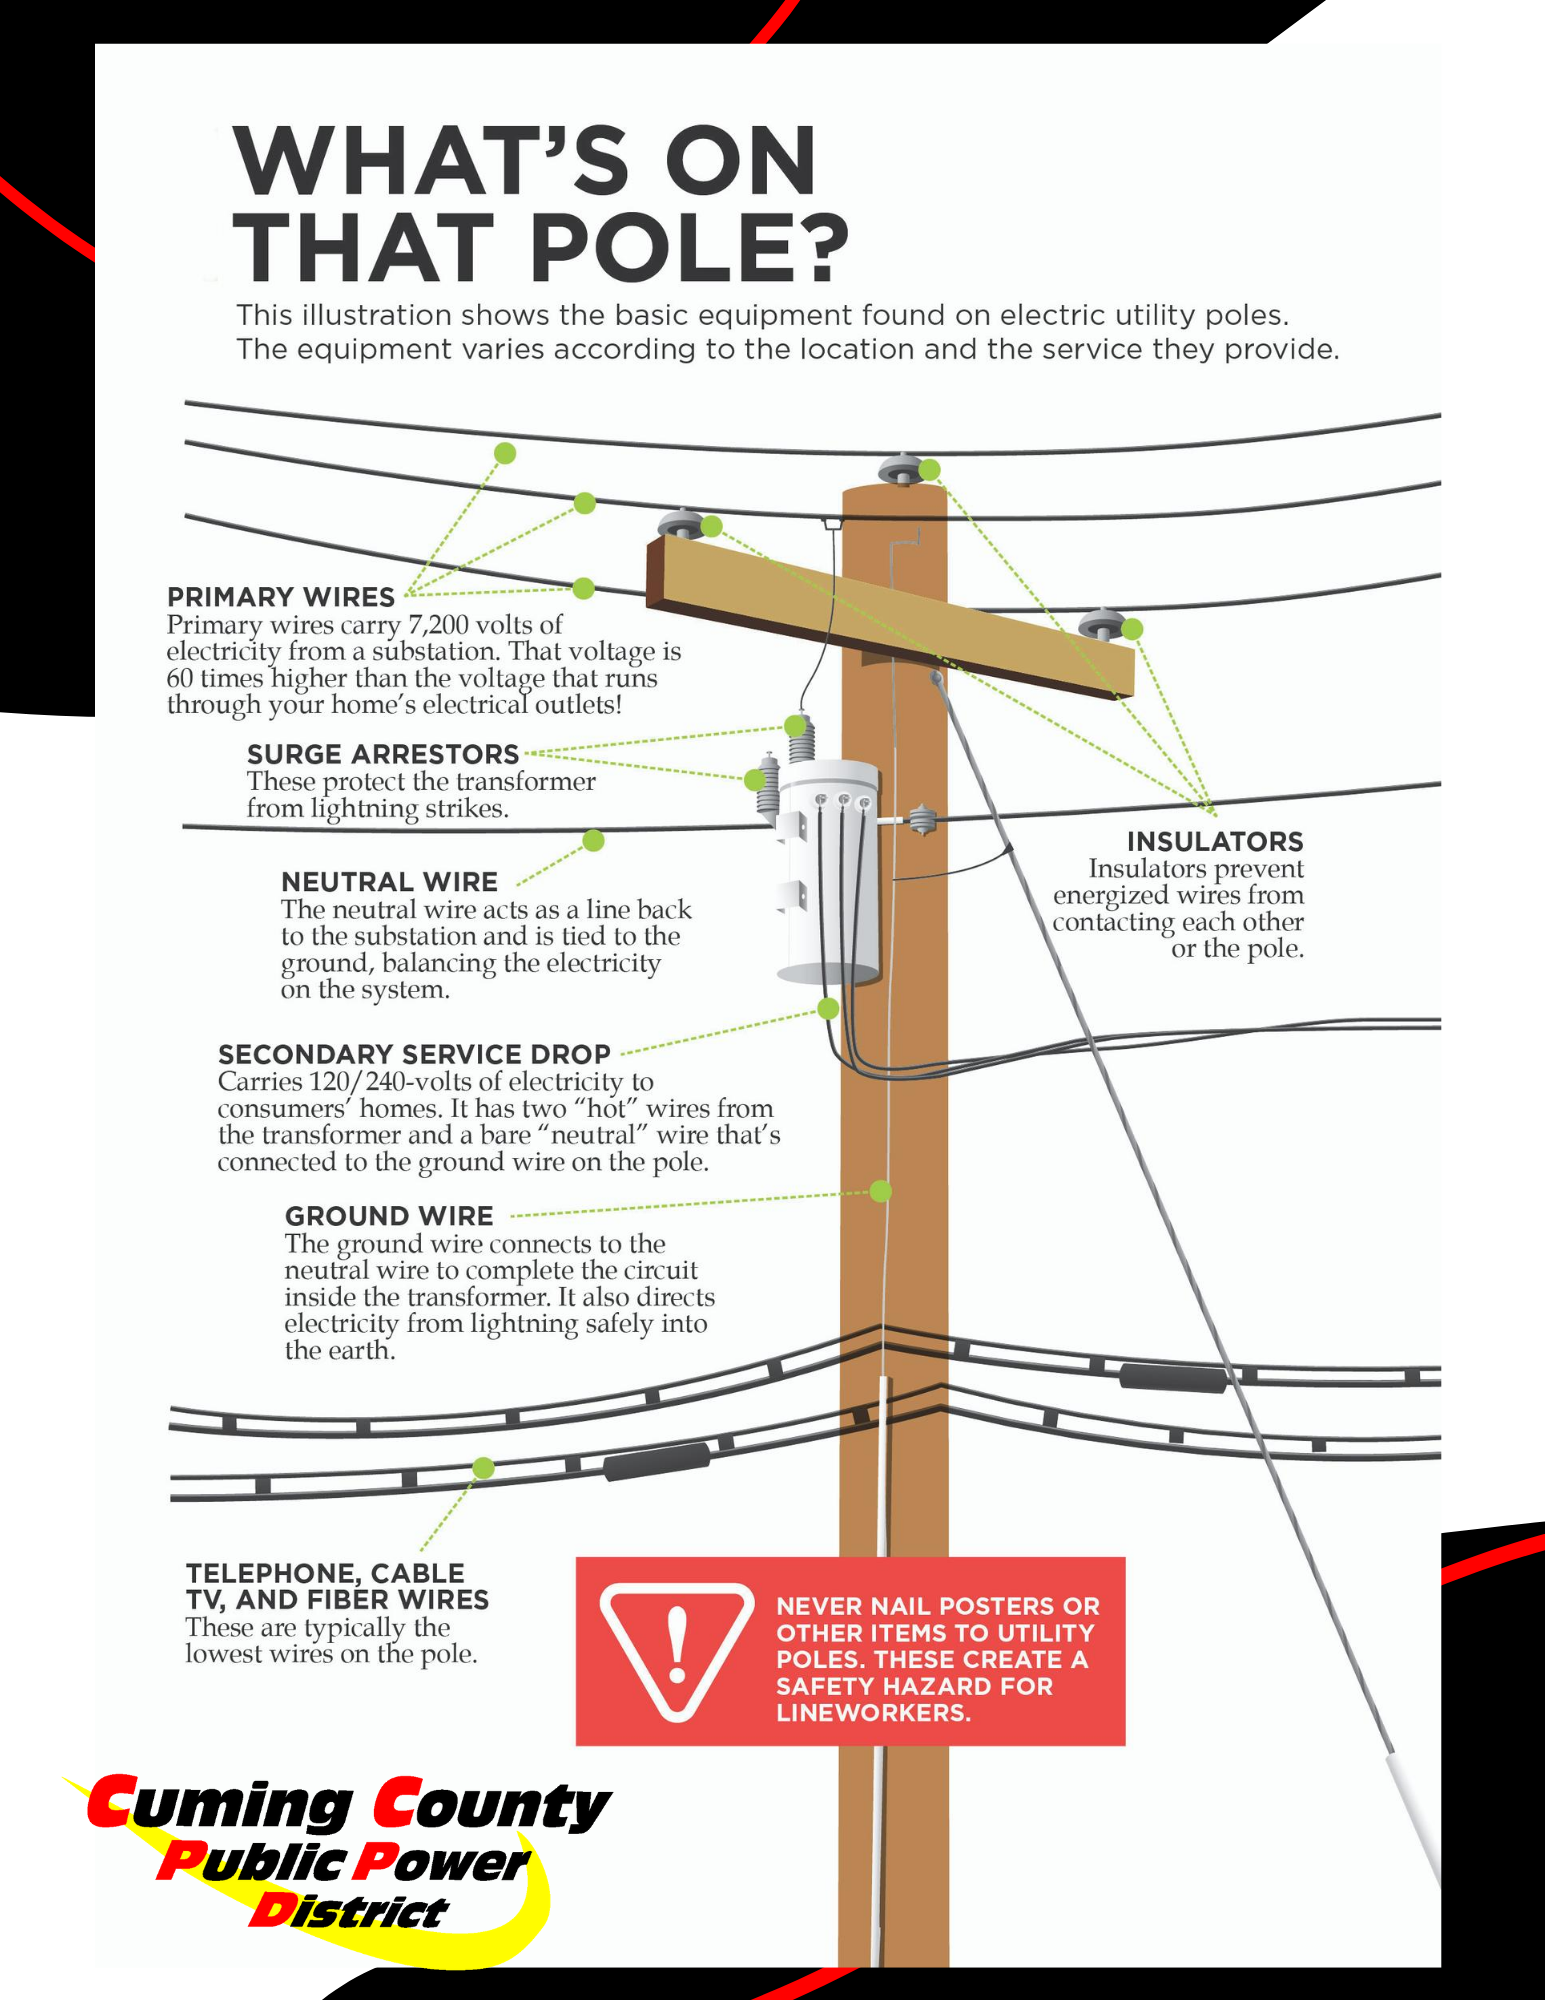 Cuming County PPD: Do you know what is on a power pole? Here is a